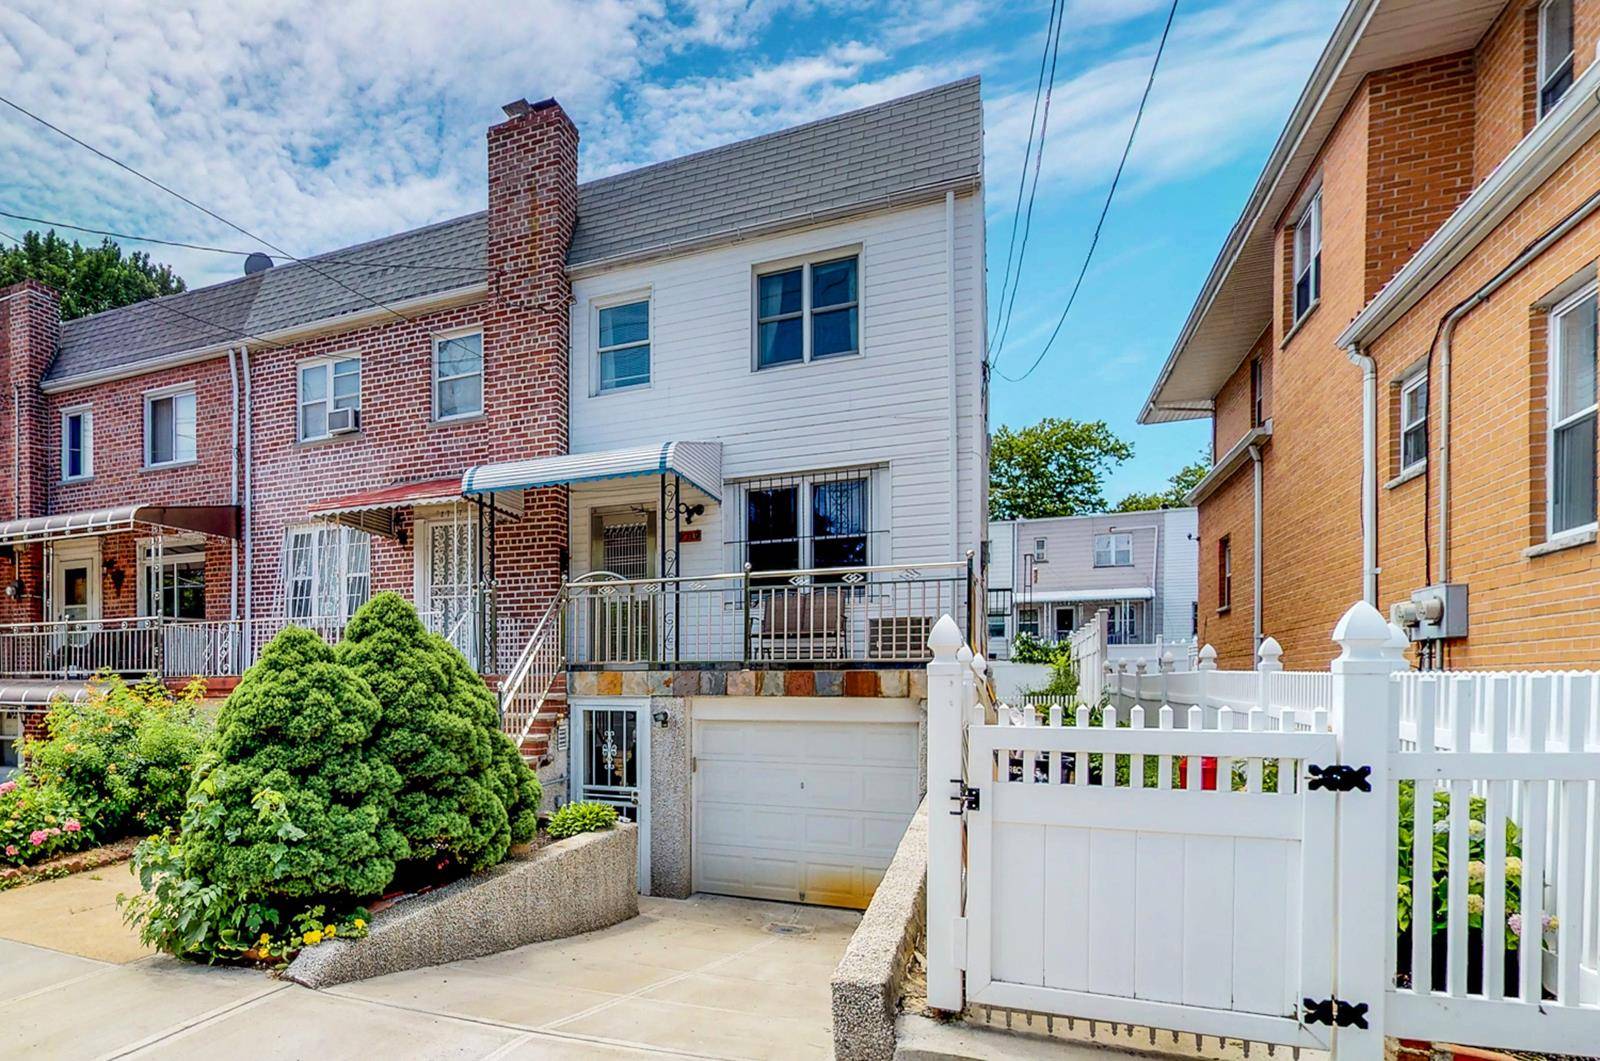 CHARMING TWO FAMILY HOME LOCATED IN PELHAM GARDENS.